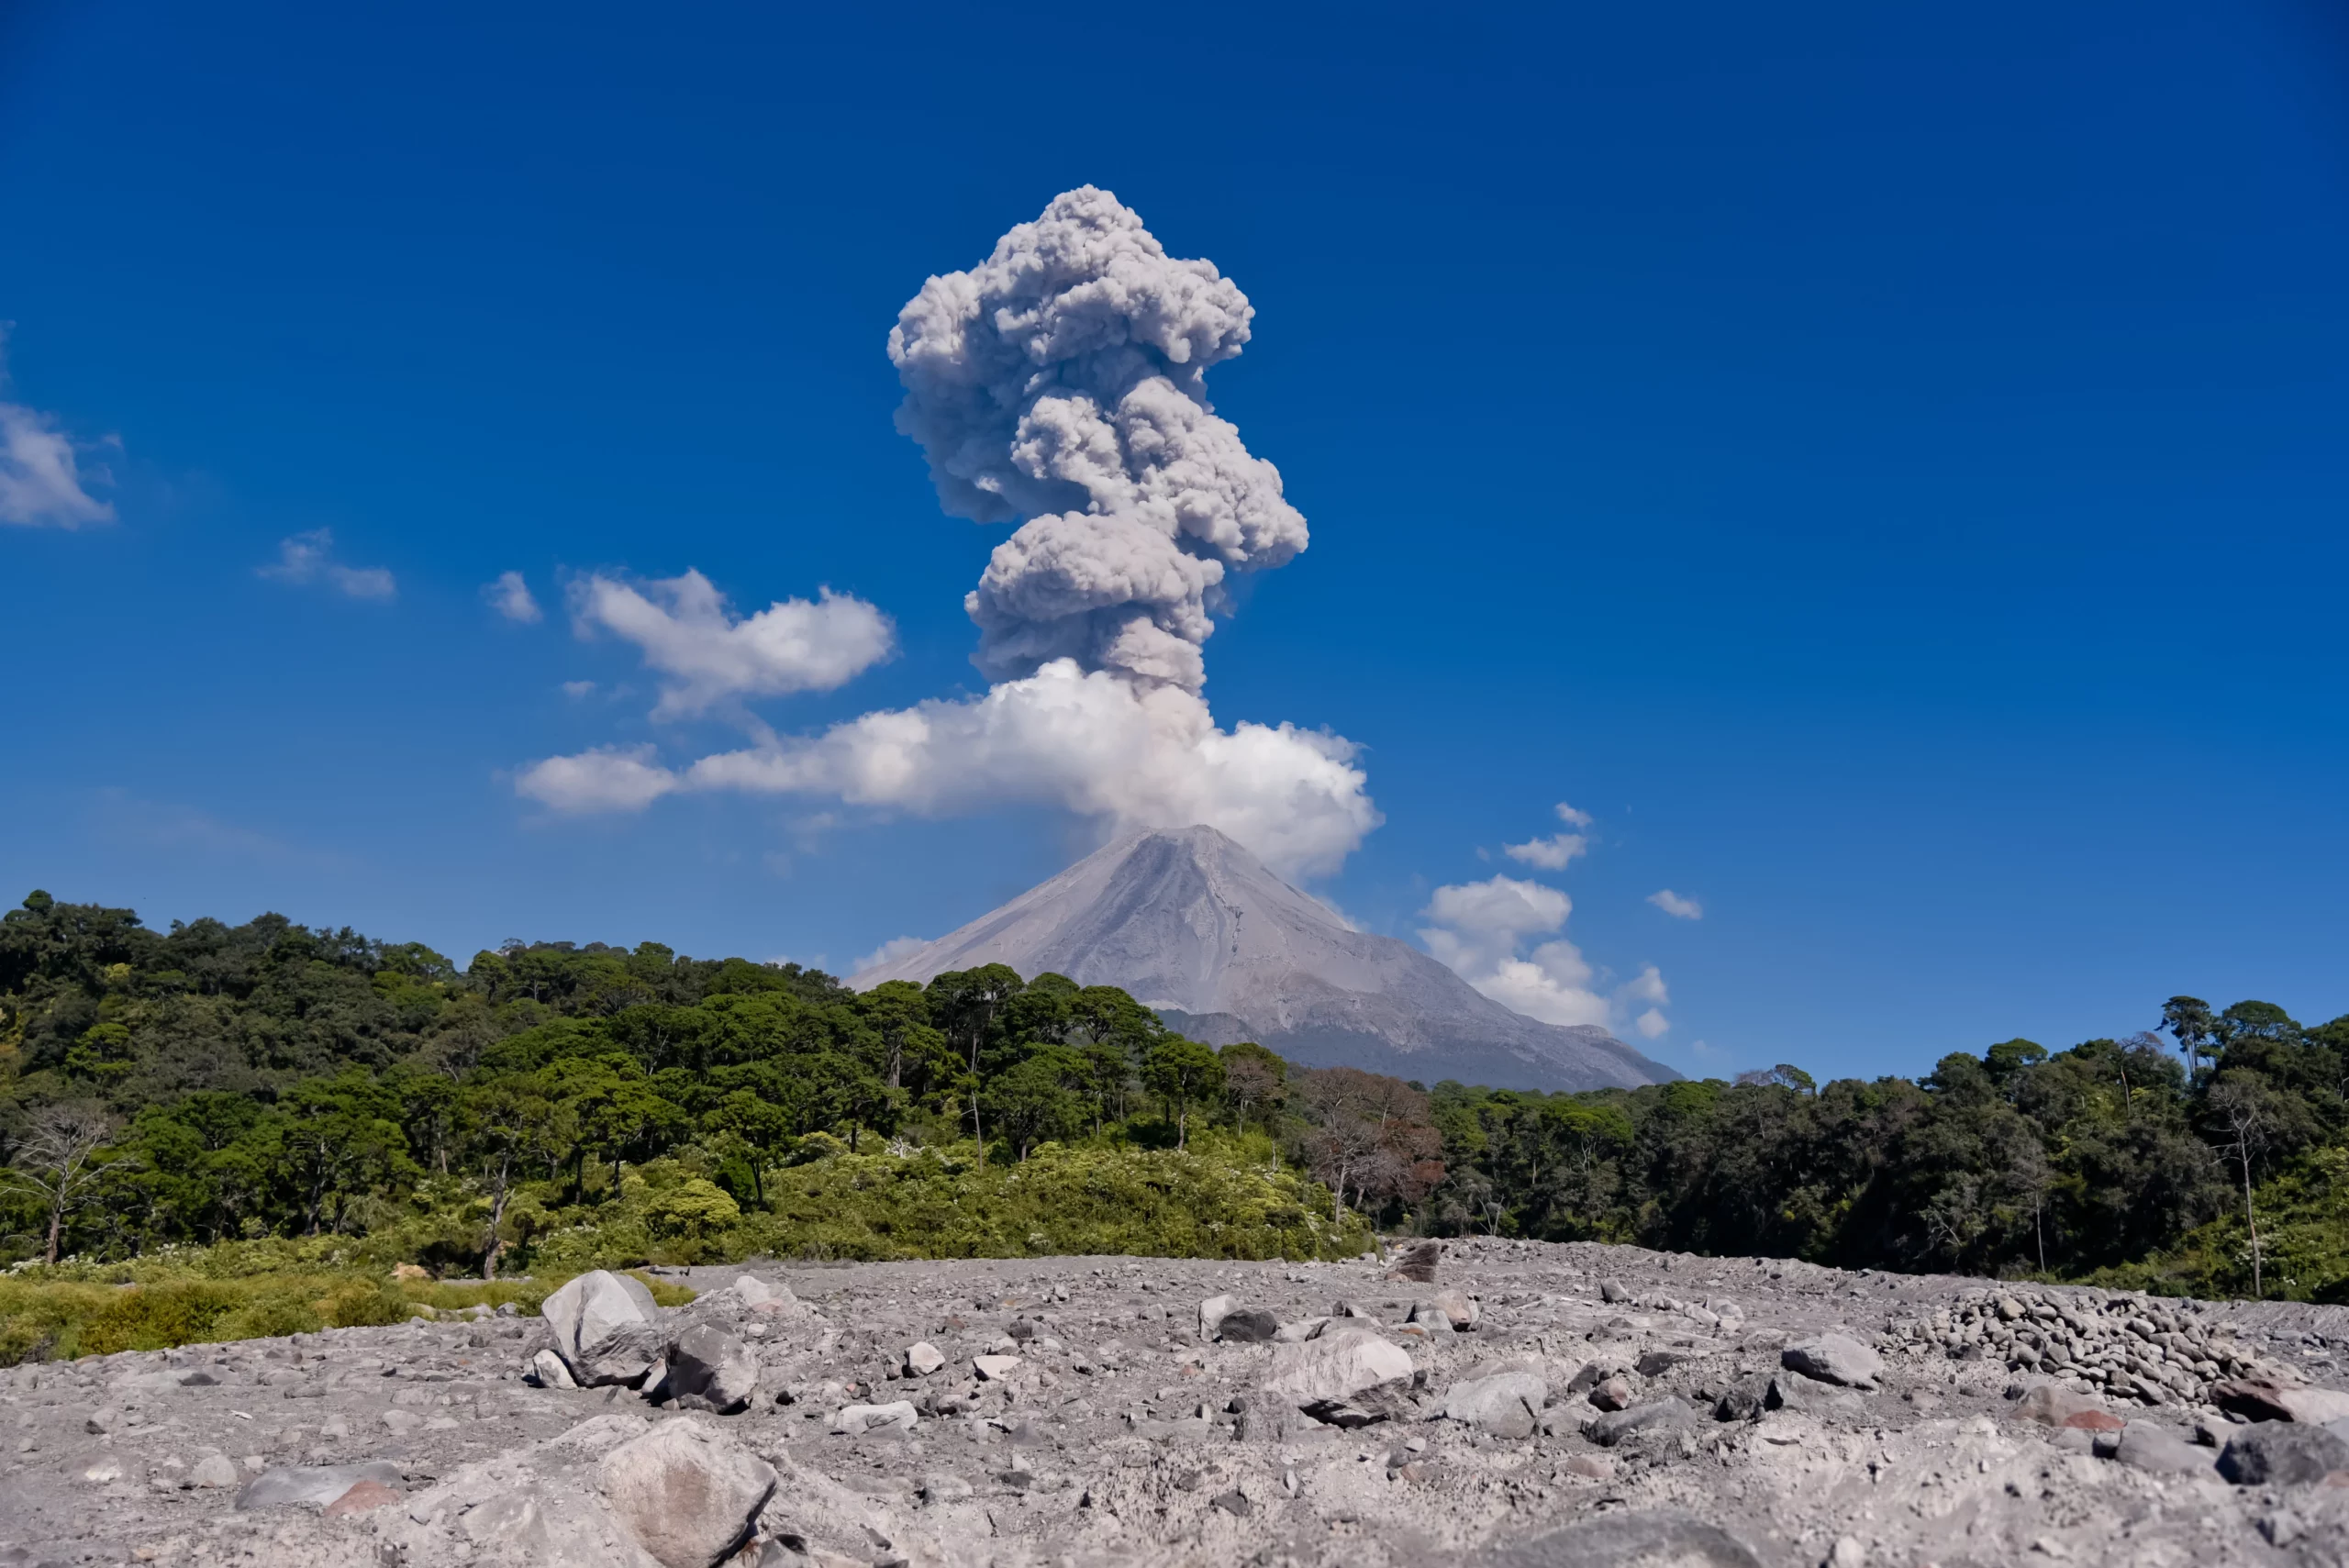 Volcanoes and Climate Change